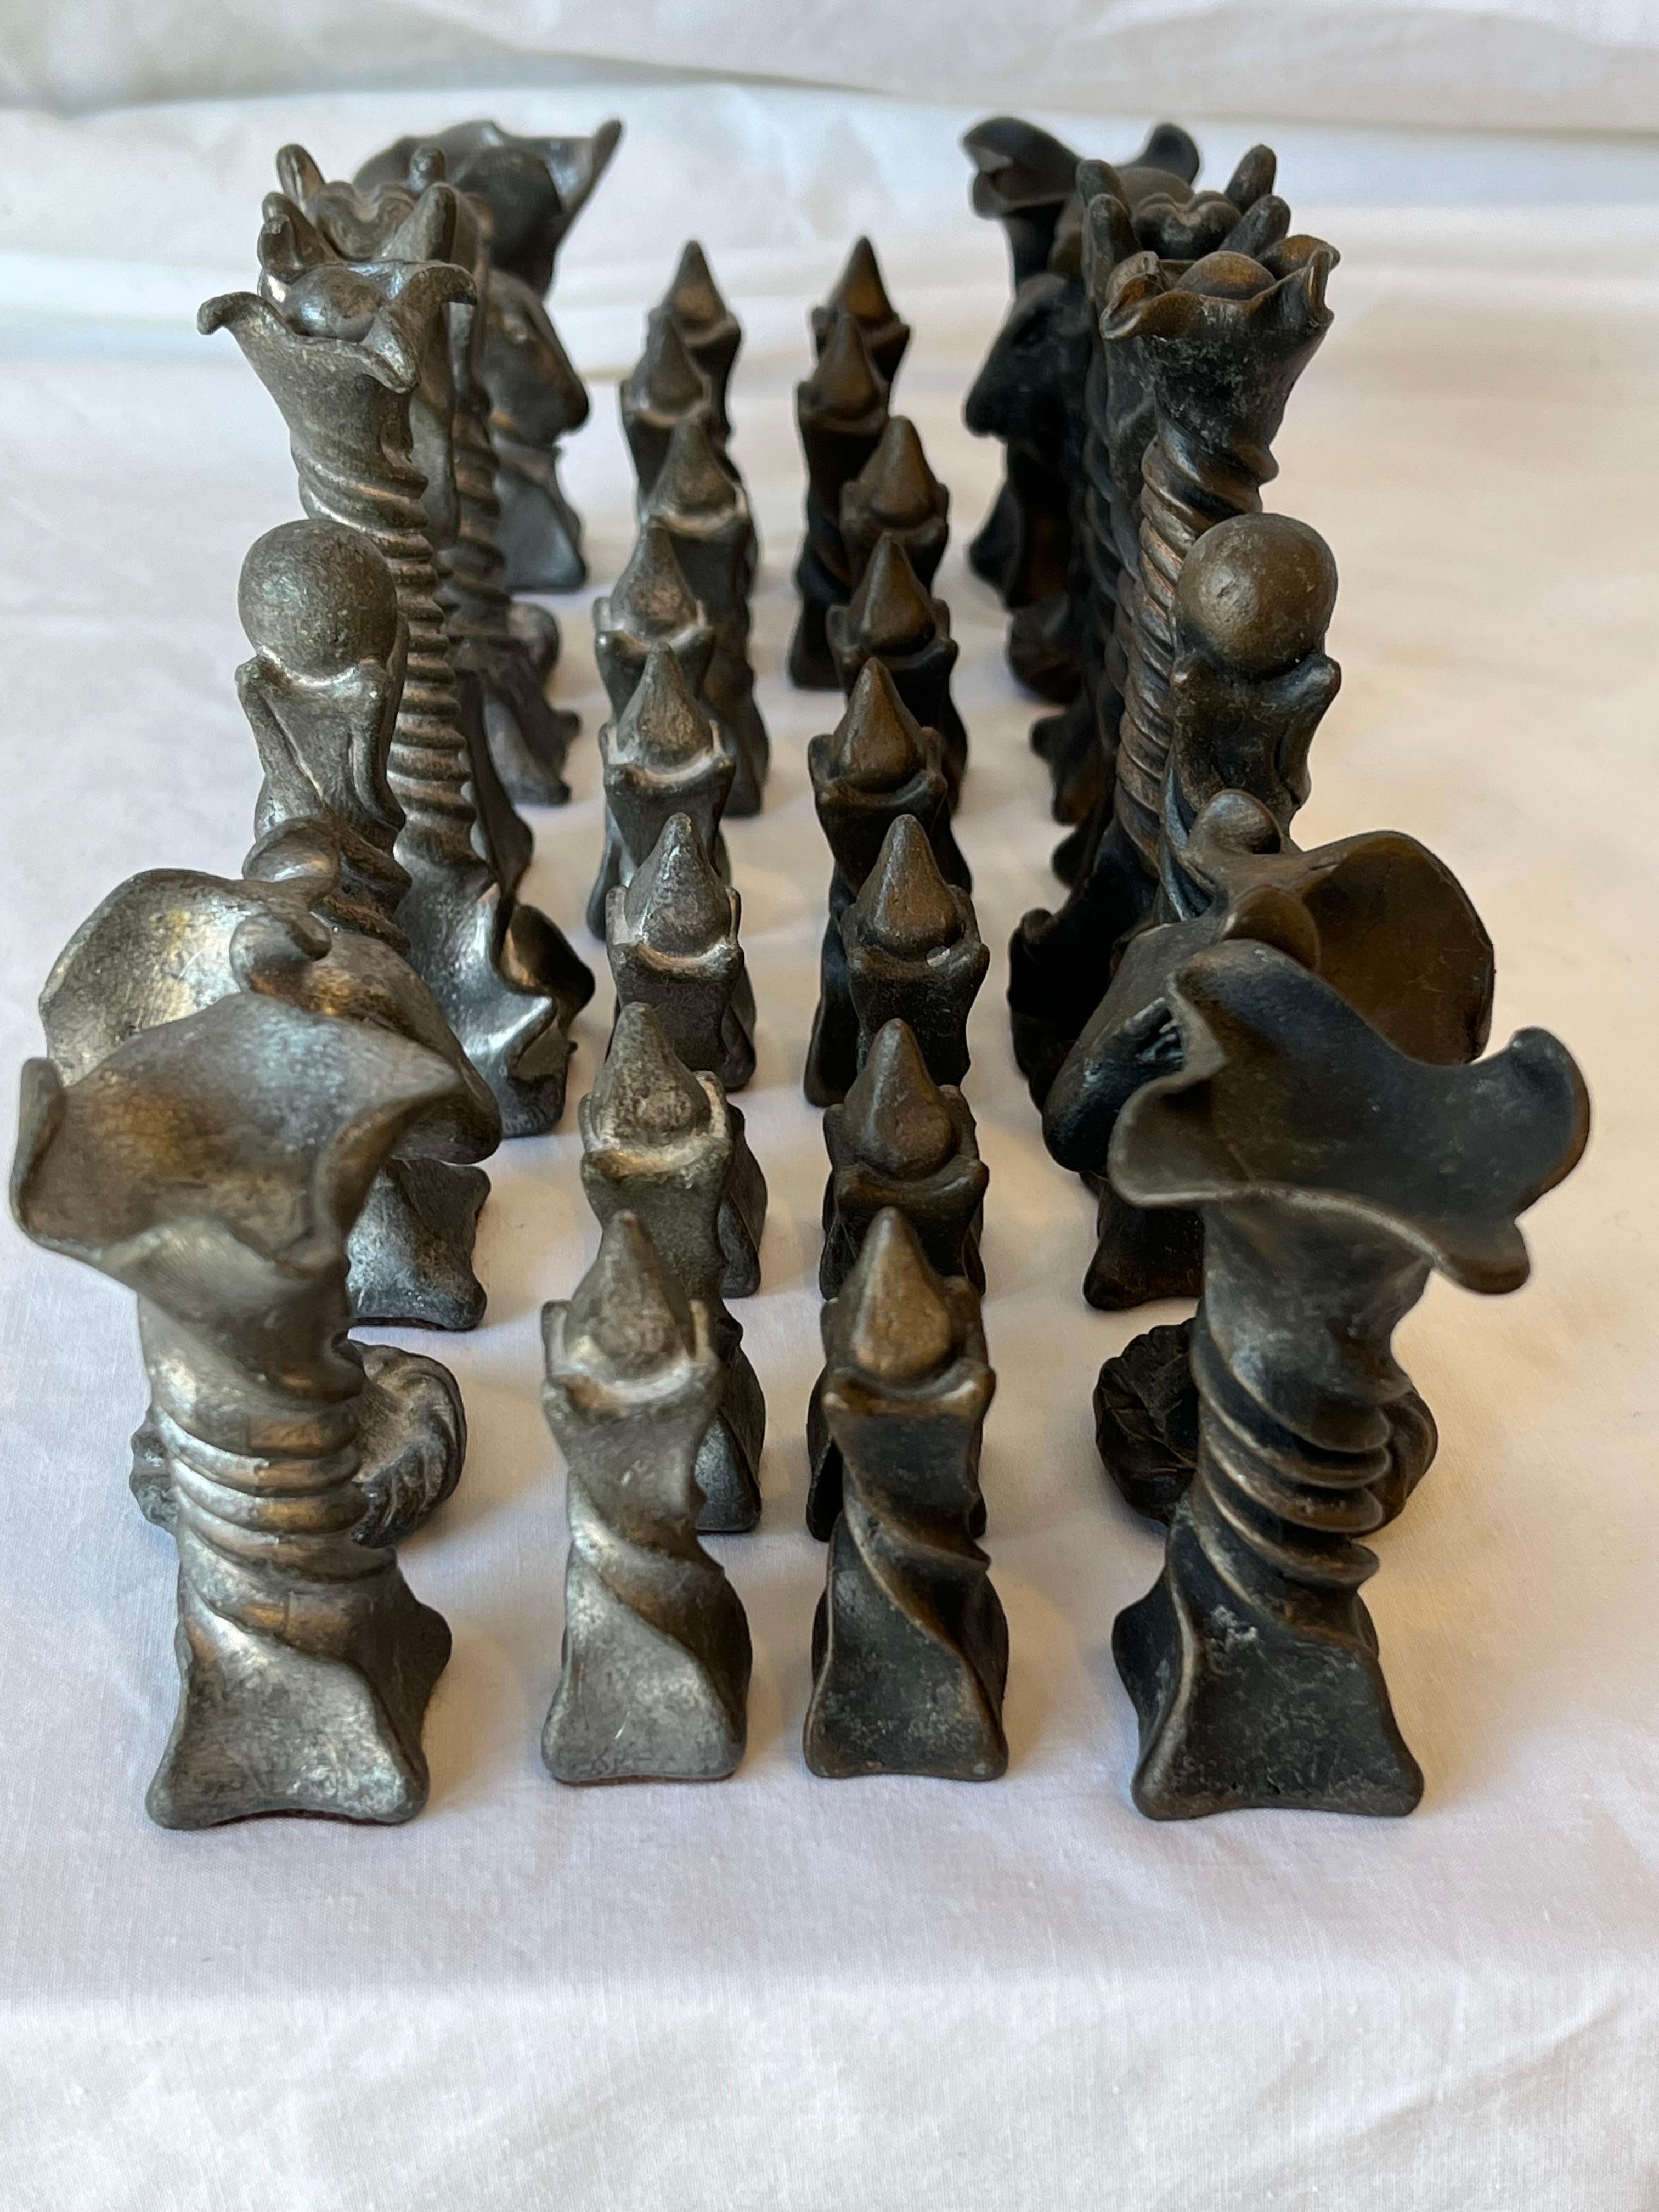 Vintage Brutalist Style Cast Metal Chess Set with Twisted and Flanged Design 1